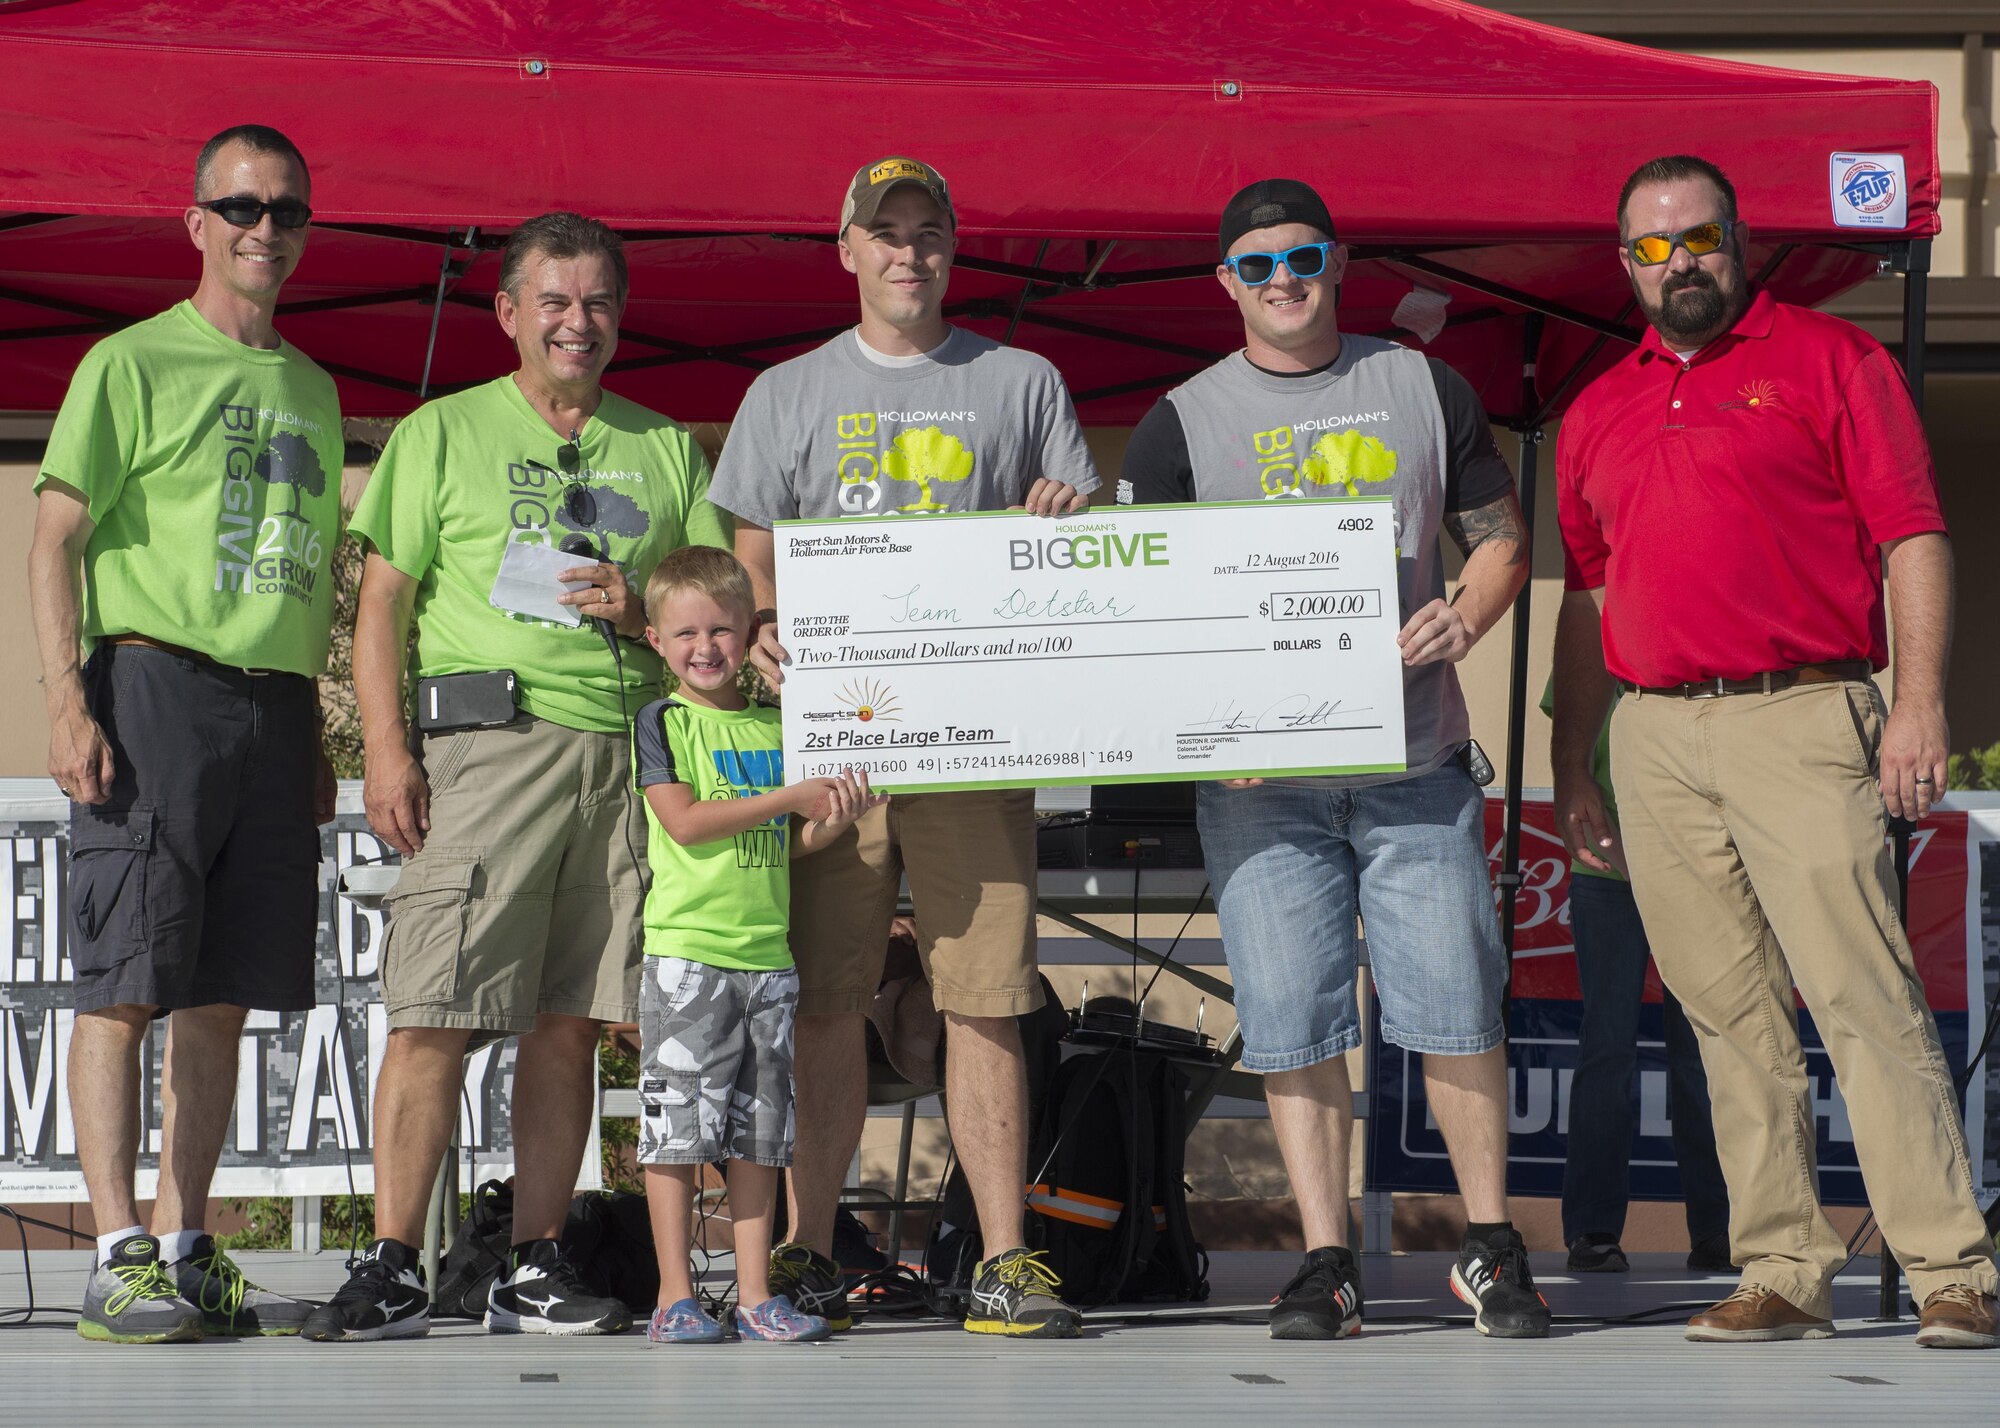 Members from the 372nd Training Squadron Detachment 10’s Team Detstar receive their $2,000 reward for winning the Second Place Large Team Award at the Big Give after-party August 12, 2016 at Holloman Air Force Base, N.M. Over the course of three weeks, 32 teams of 412 participants spent nearly 5,000 man hours volunteering in the local community — saving the area $202,092.33. (U.S. Air Force photo by Airman 1st Class Randahl J. Jenson)